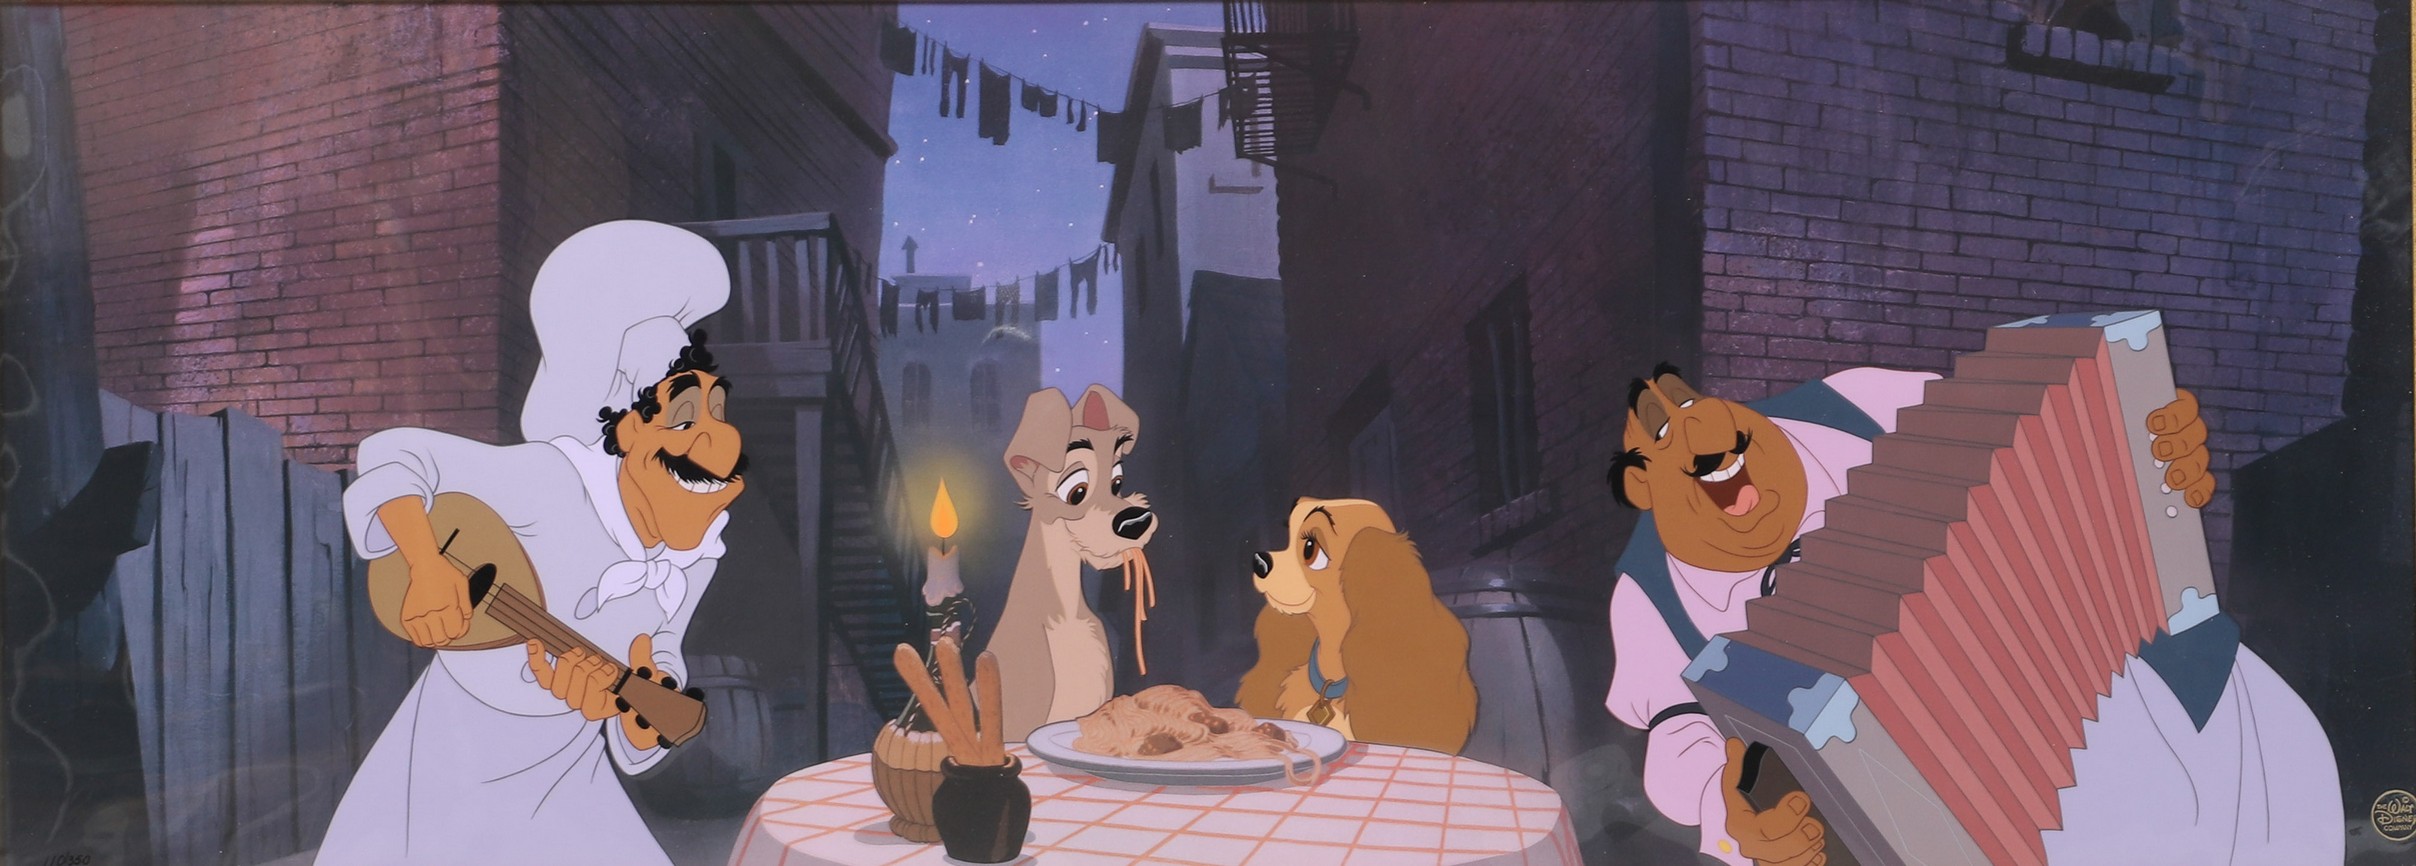 Lady & the Tramp hand painted cel